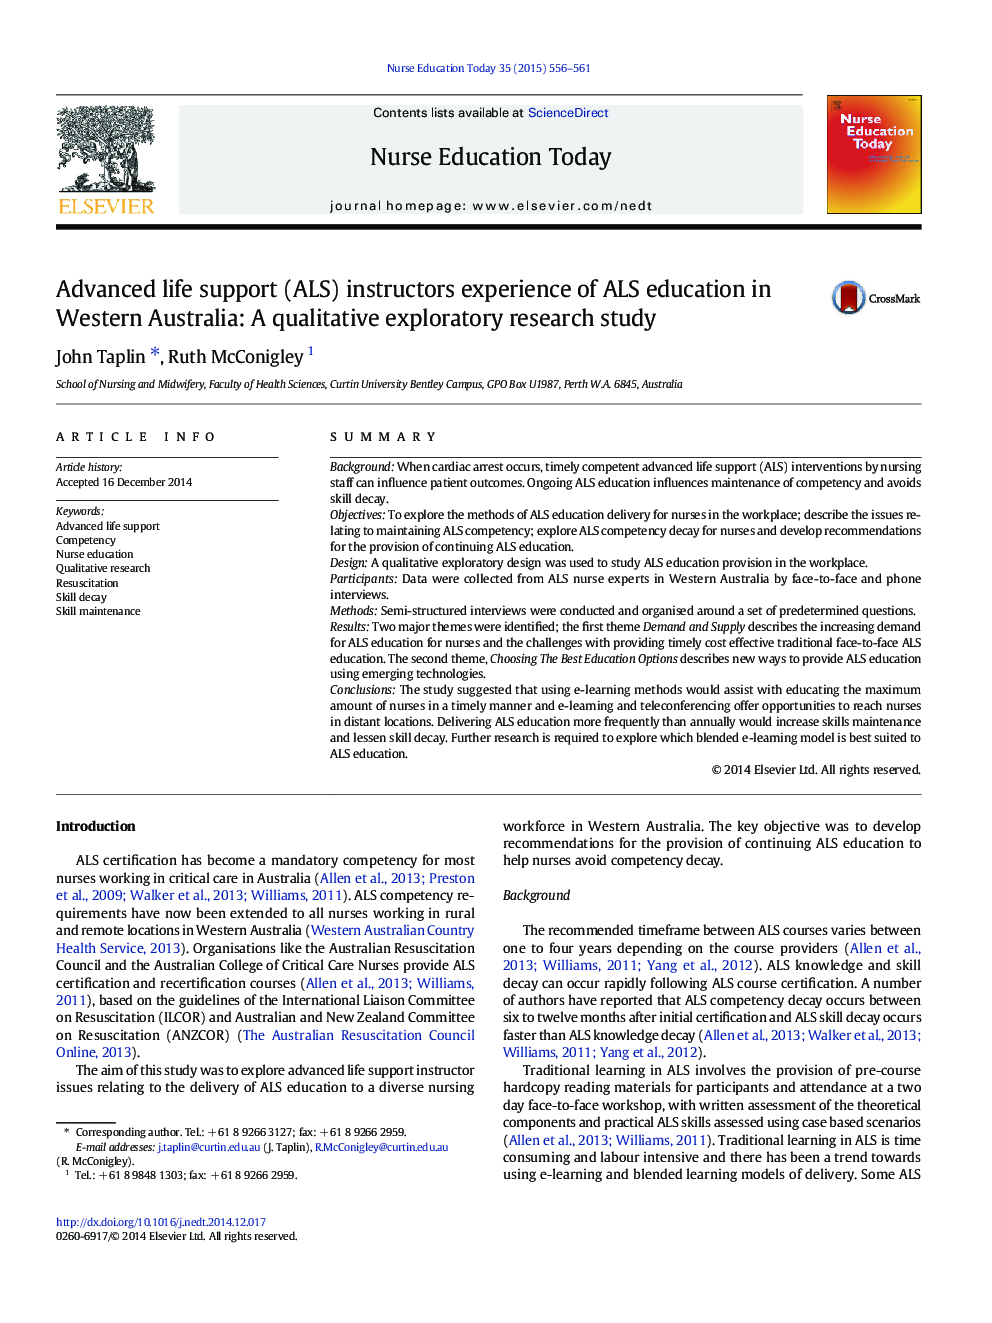 Advanced life support (ALS) instructors experience of ALS education in Western Australia: A qualitative exploratory research study